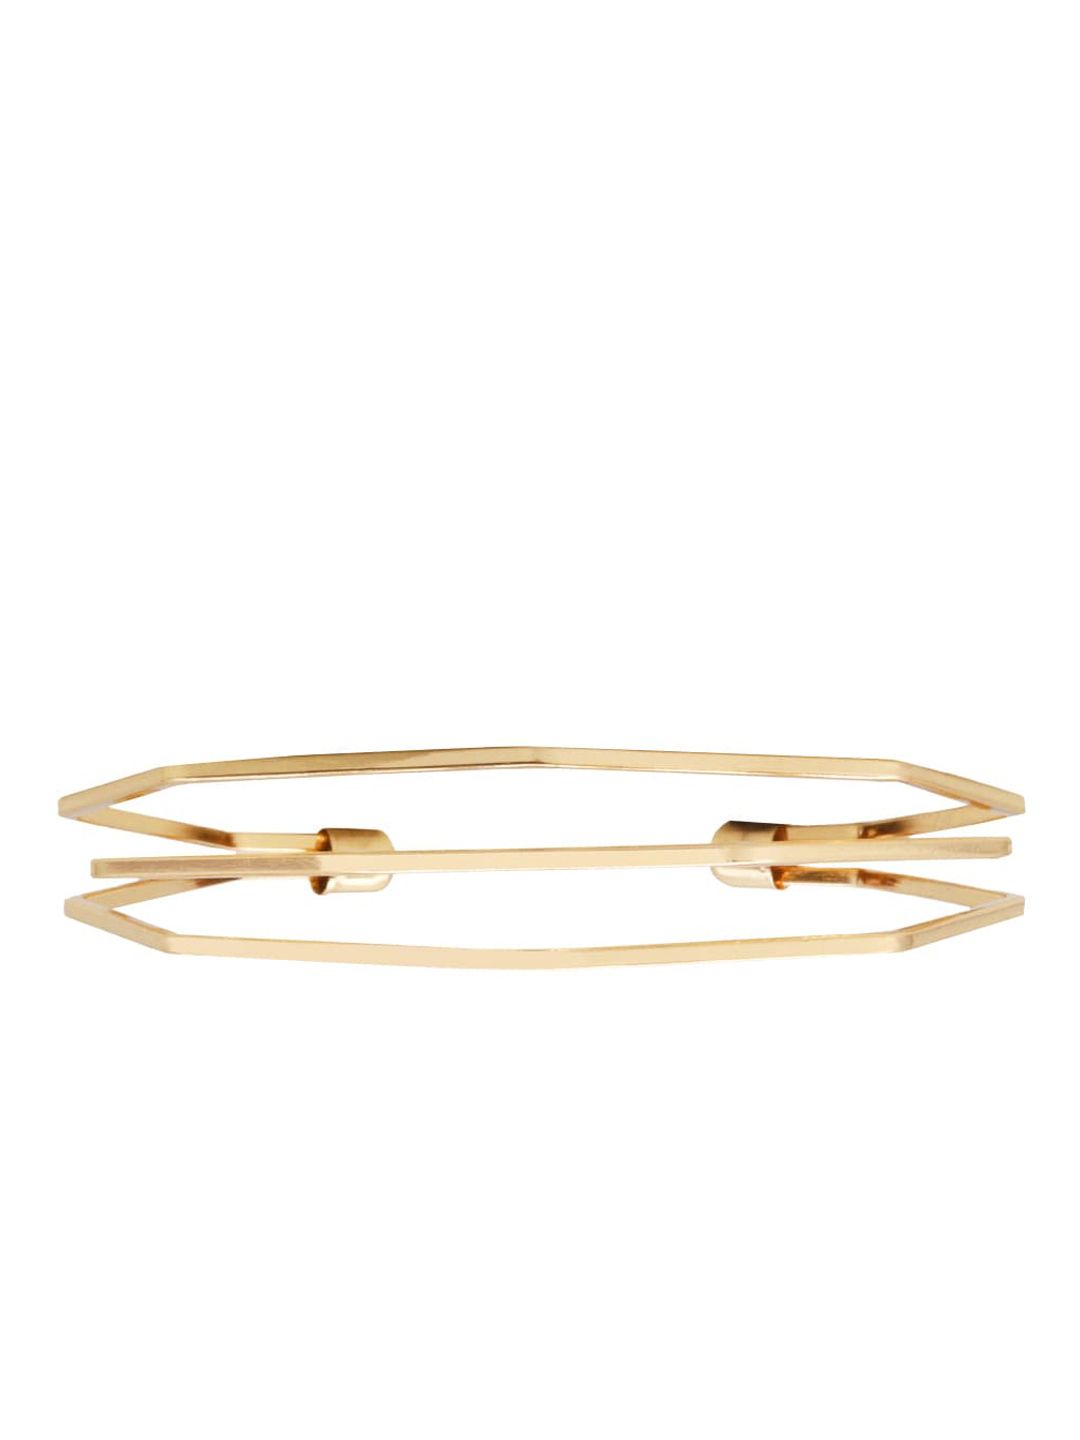 JOKER & WITCH Gold-Plated Alloy Cuff Bracelet Price in India